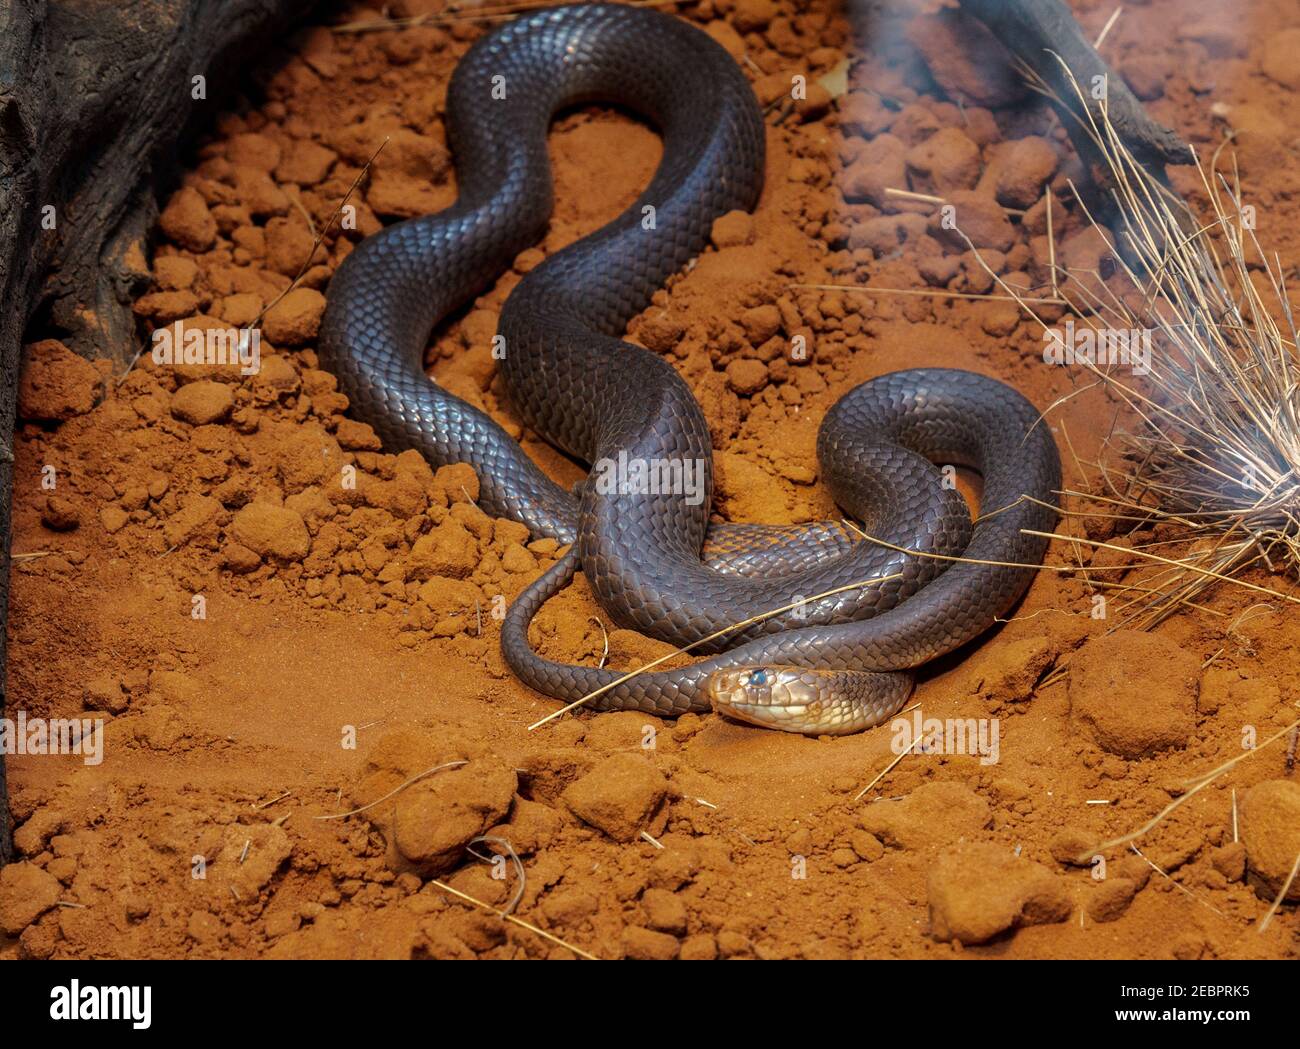 Western brown snake. Pseudonaja nuchalis, commonly known as the northern brown snake or gwardar, is a species of very fast, highly venomous elapid sna Stock Photo